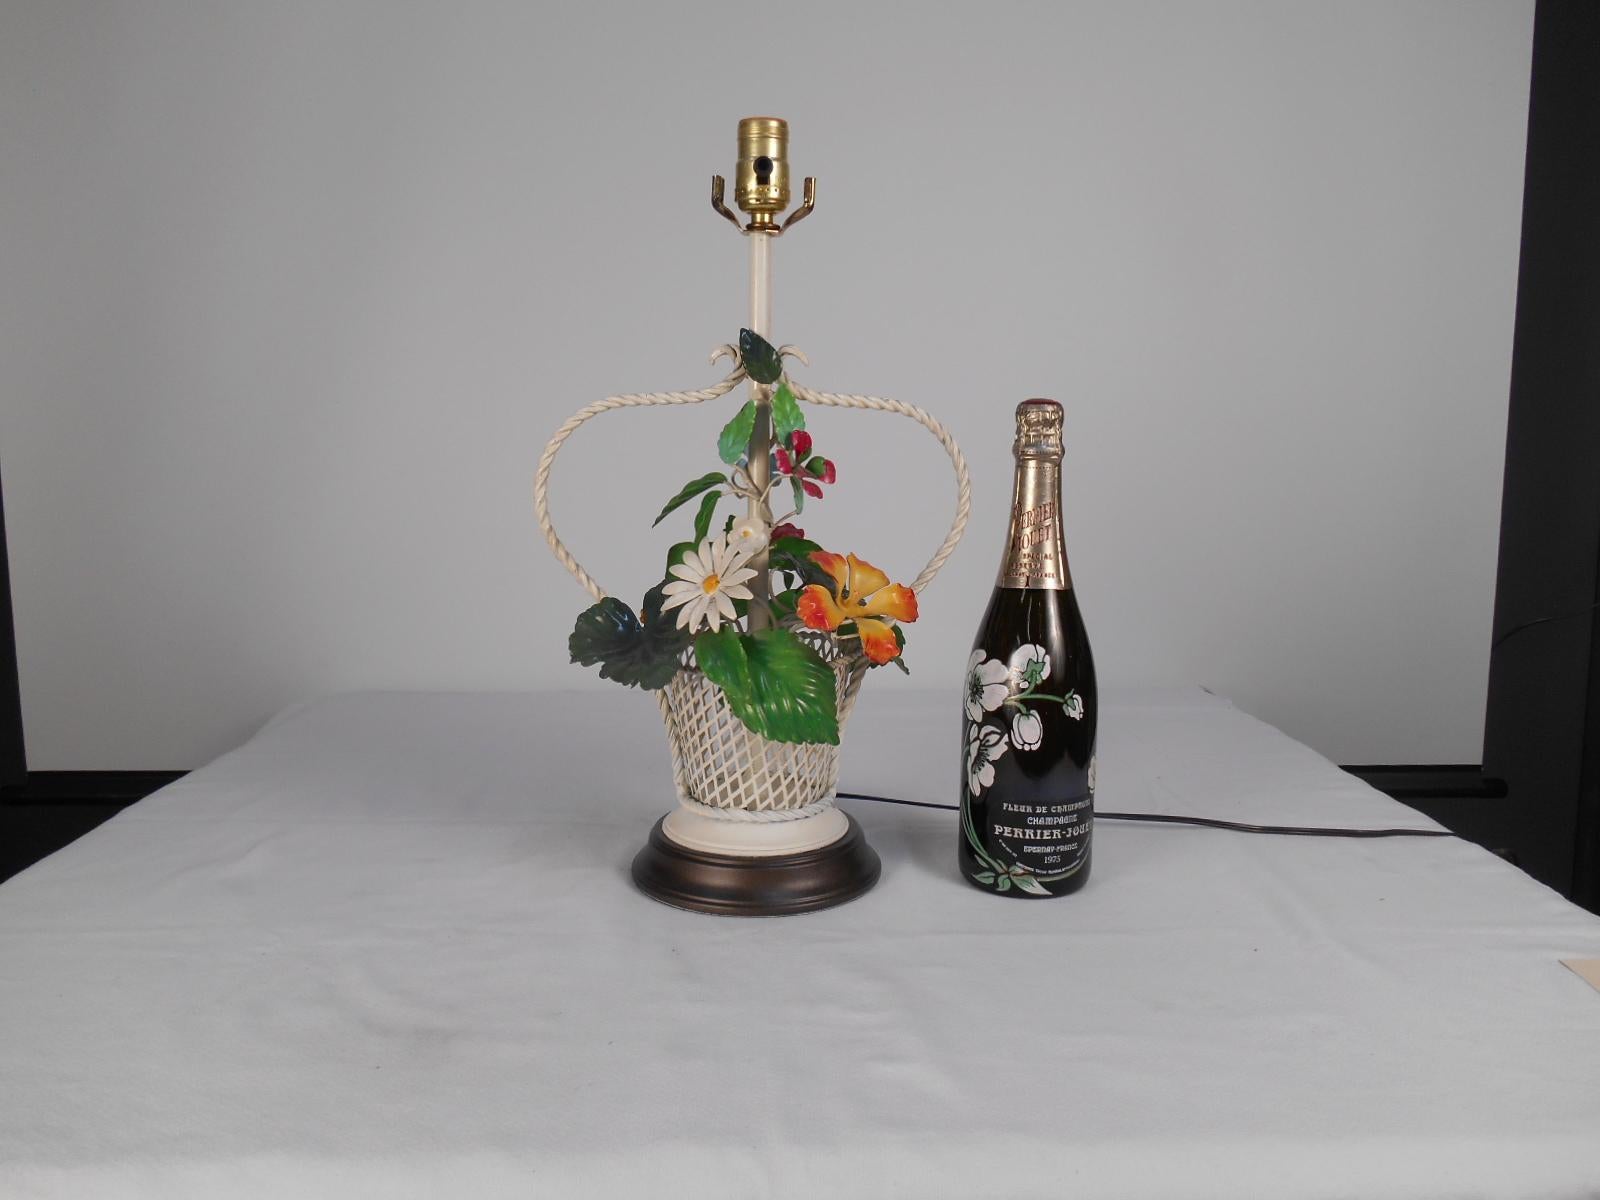 A charming colorful tole floral basket table lamp. Made in the 1960s. The white painted basket off sets the greens, oranges, reds and yellows withing the tole floral bouquet. We have freshened up the original lamp base with new paint.